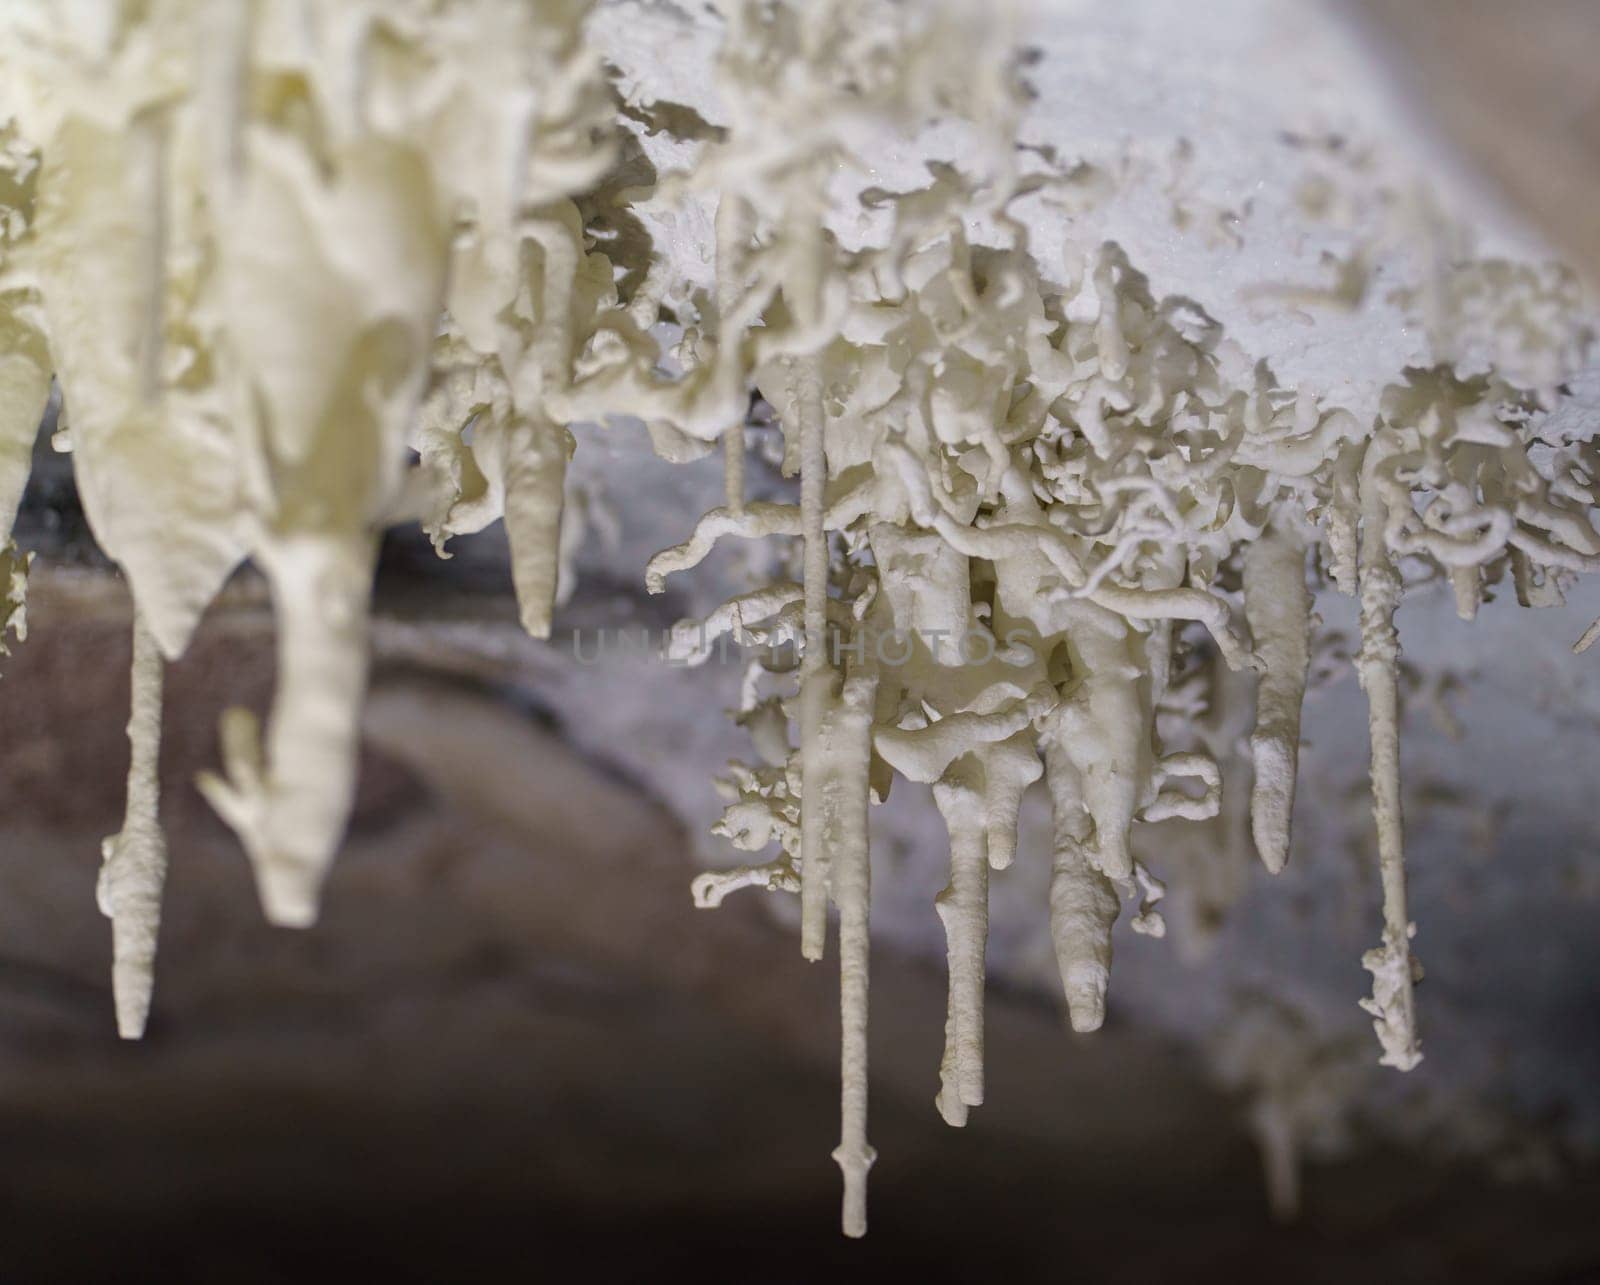 Intricate Icicle Formation in Cave During Winter Season by FerradalFCG